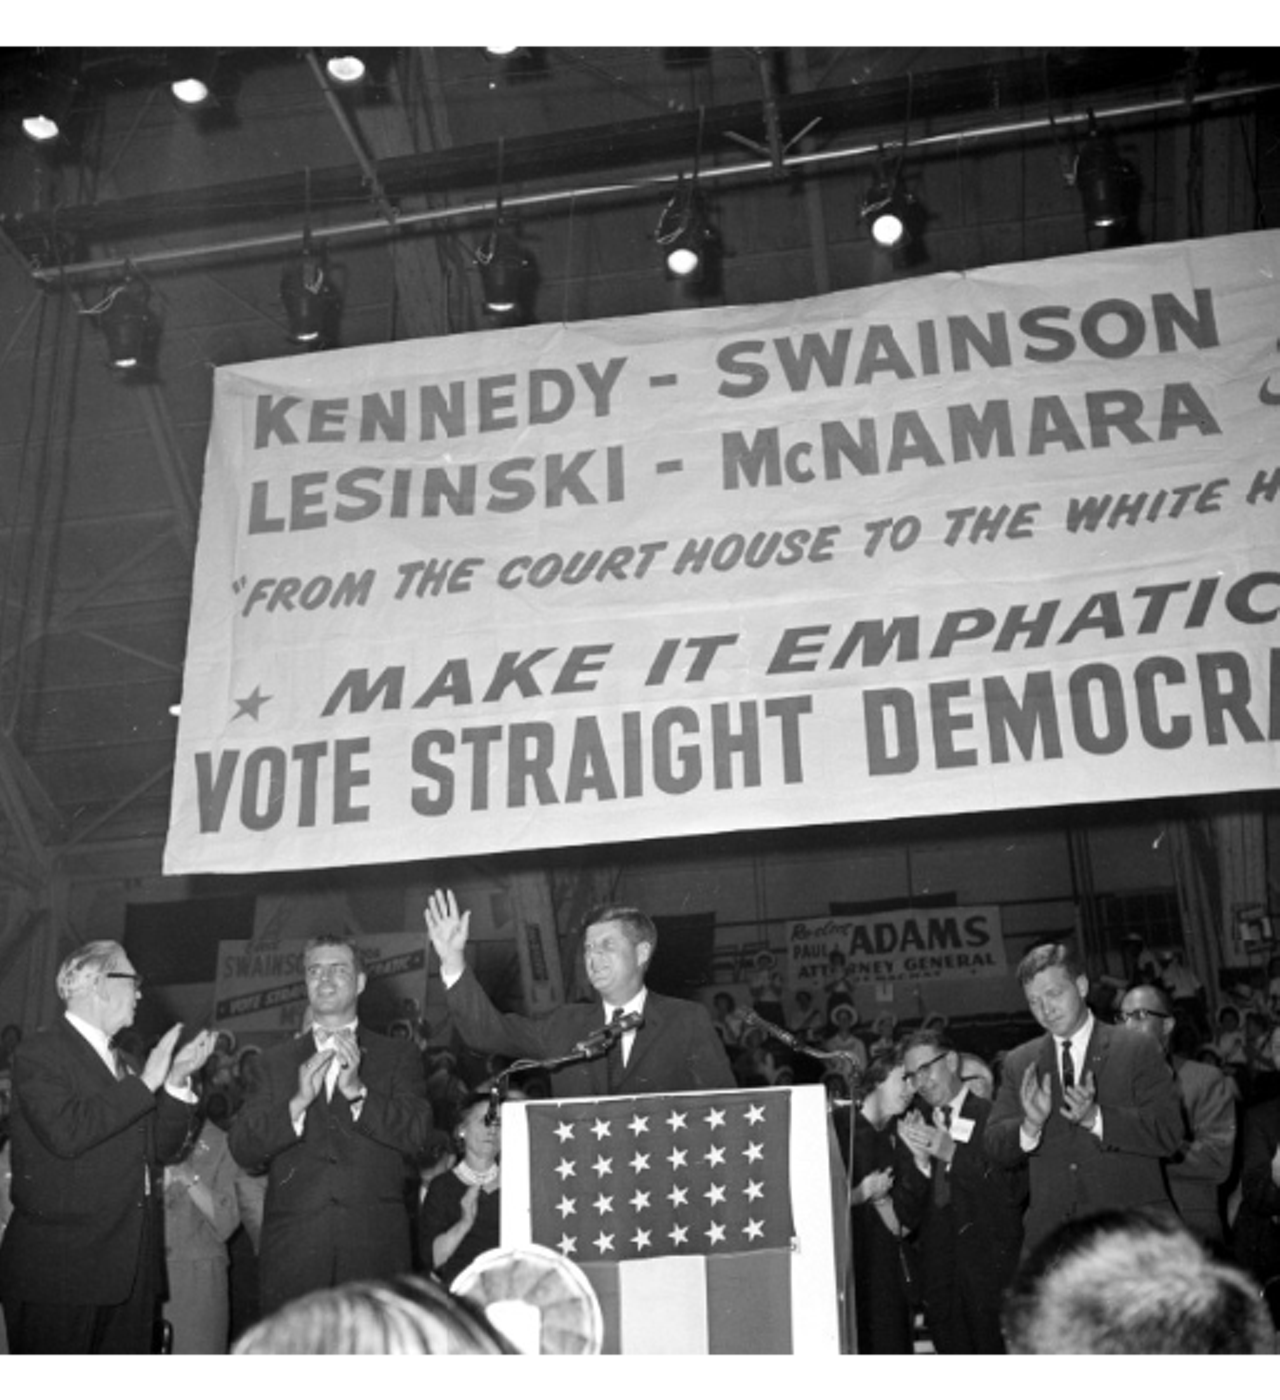 11 historical photos from elections past in Detroit